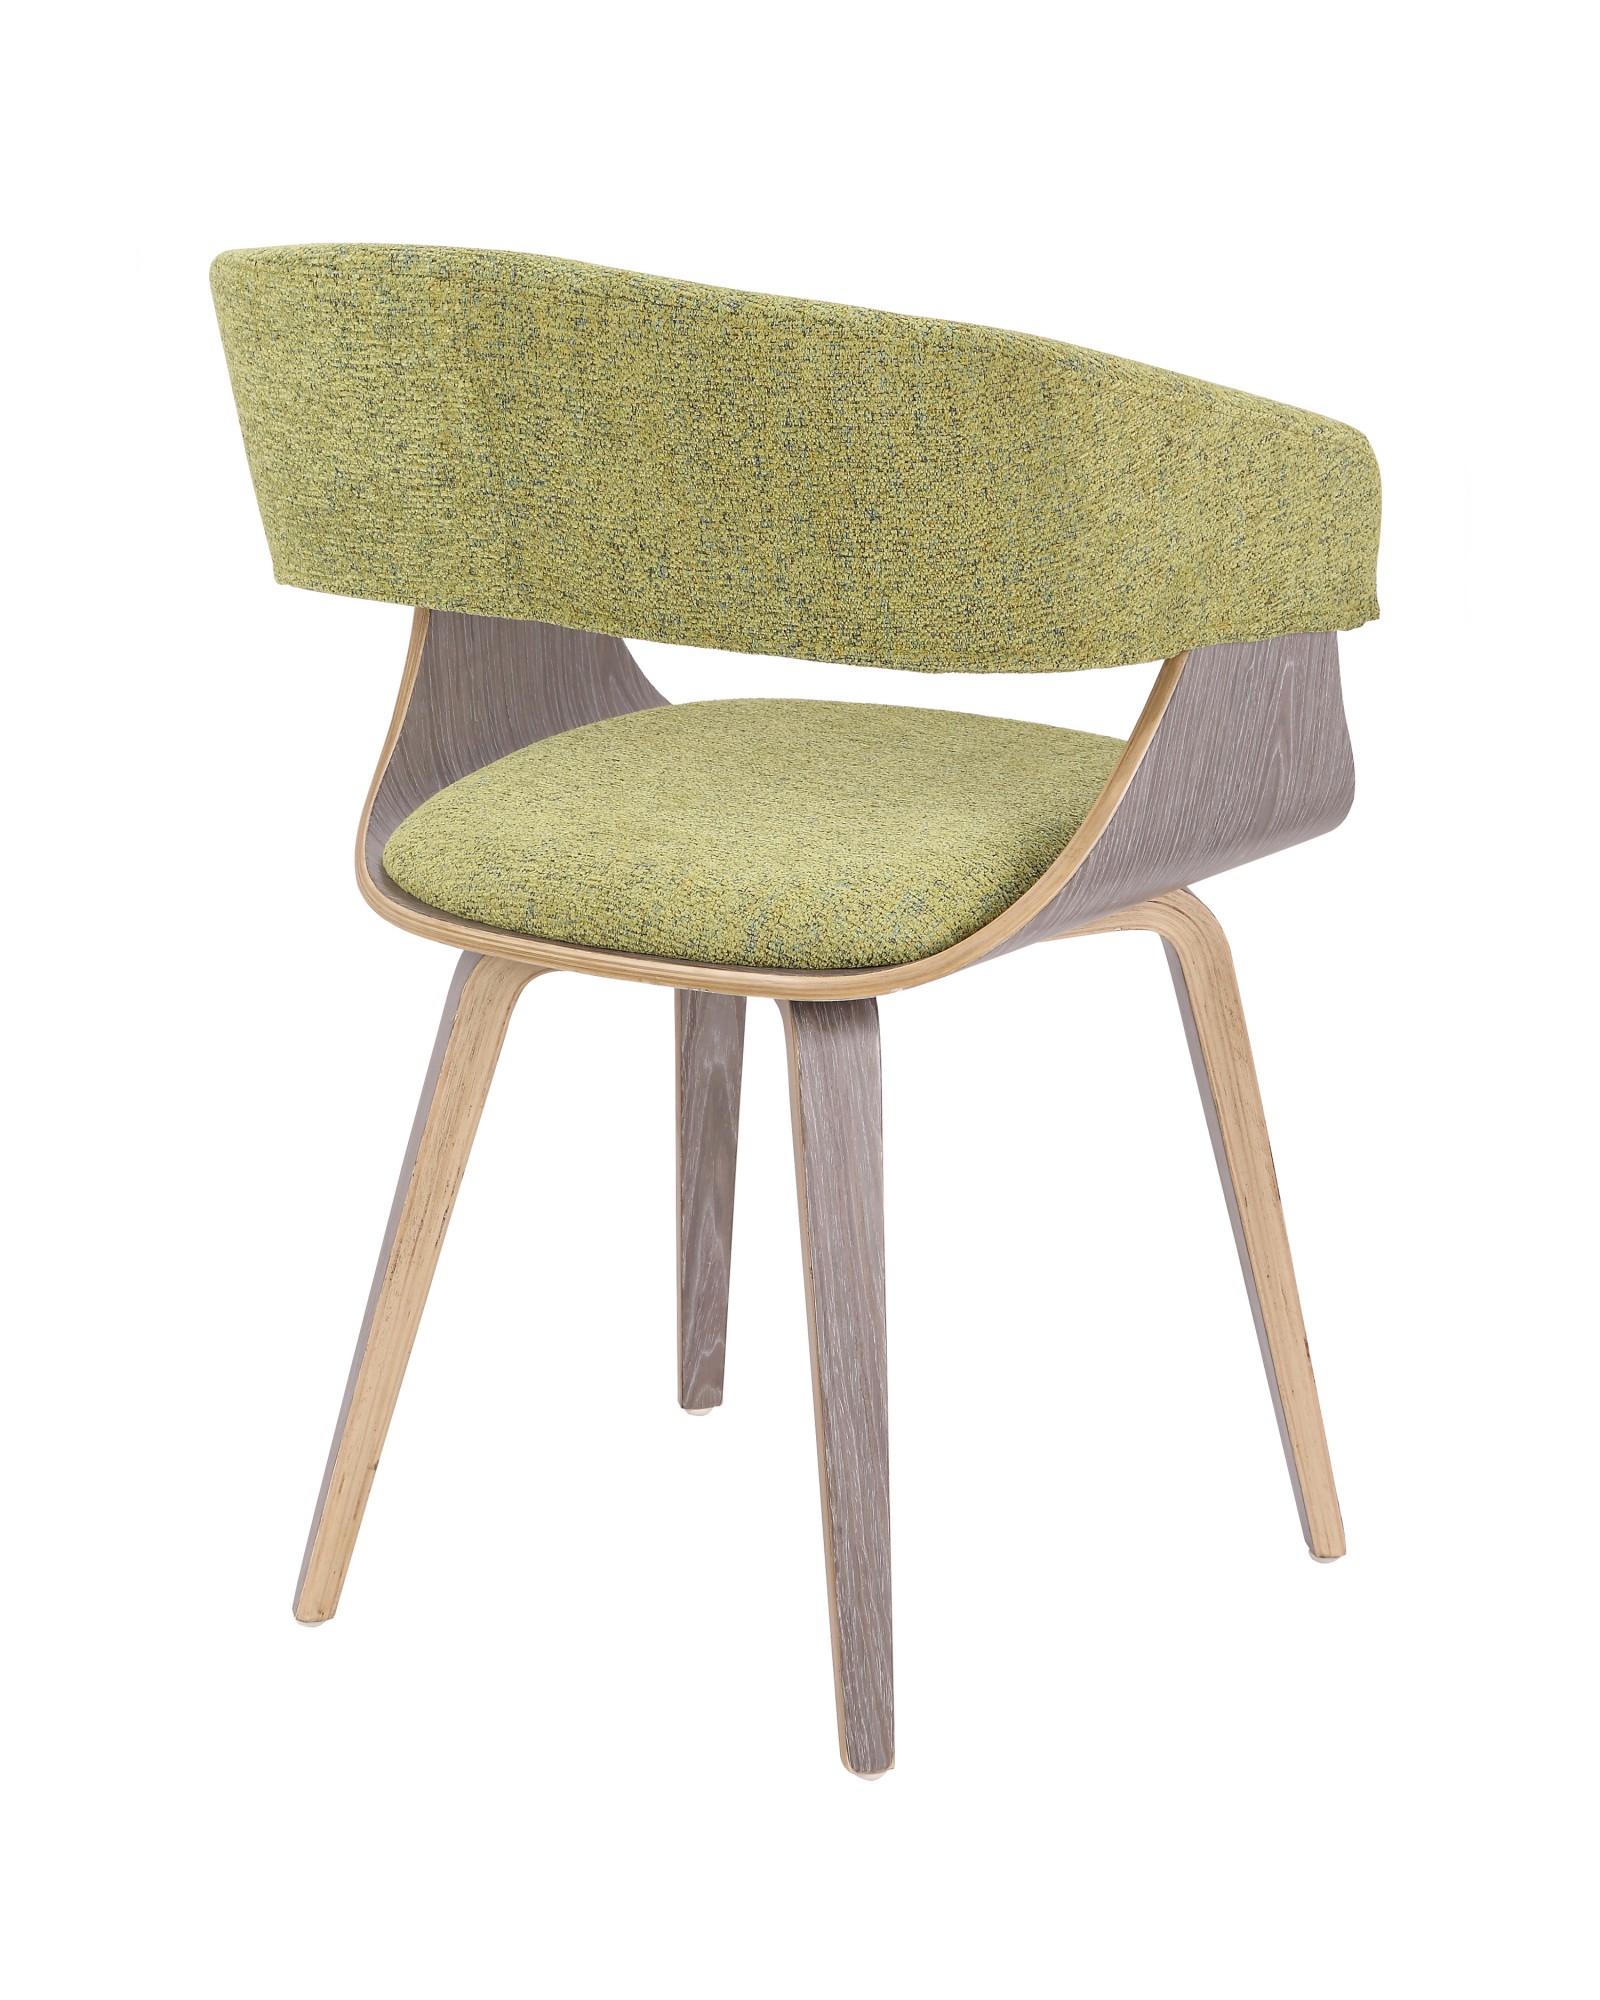 Elisa Mid-Century Modern Dining/Accent Chair in Light Grey Wood and Green Fabric